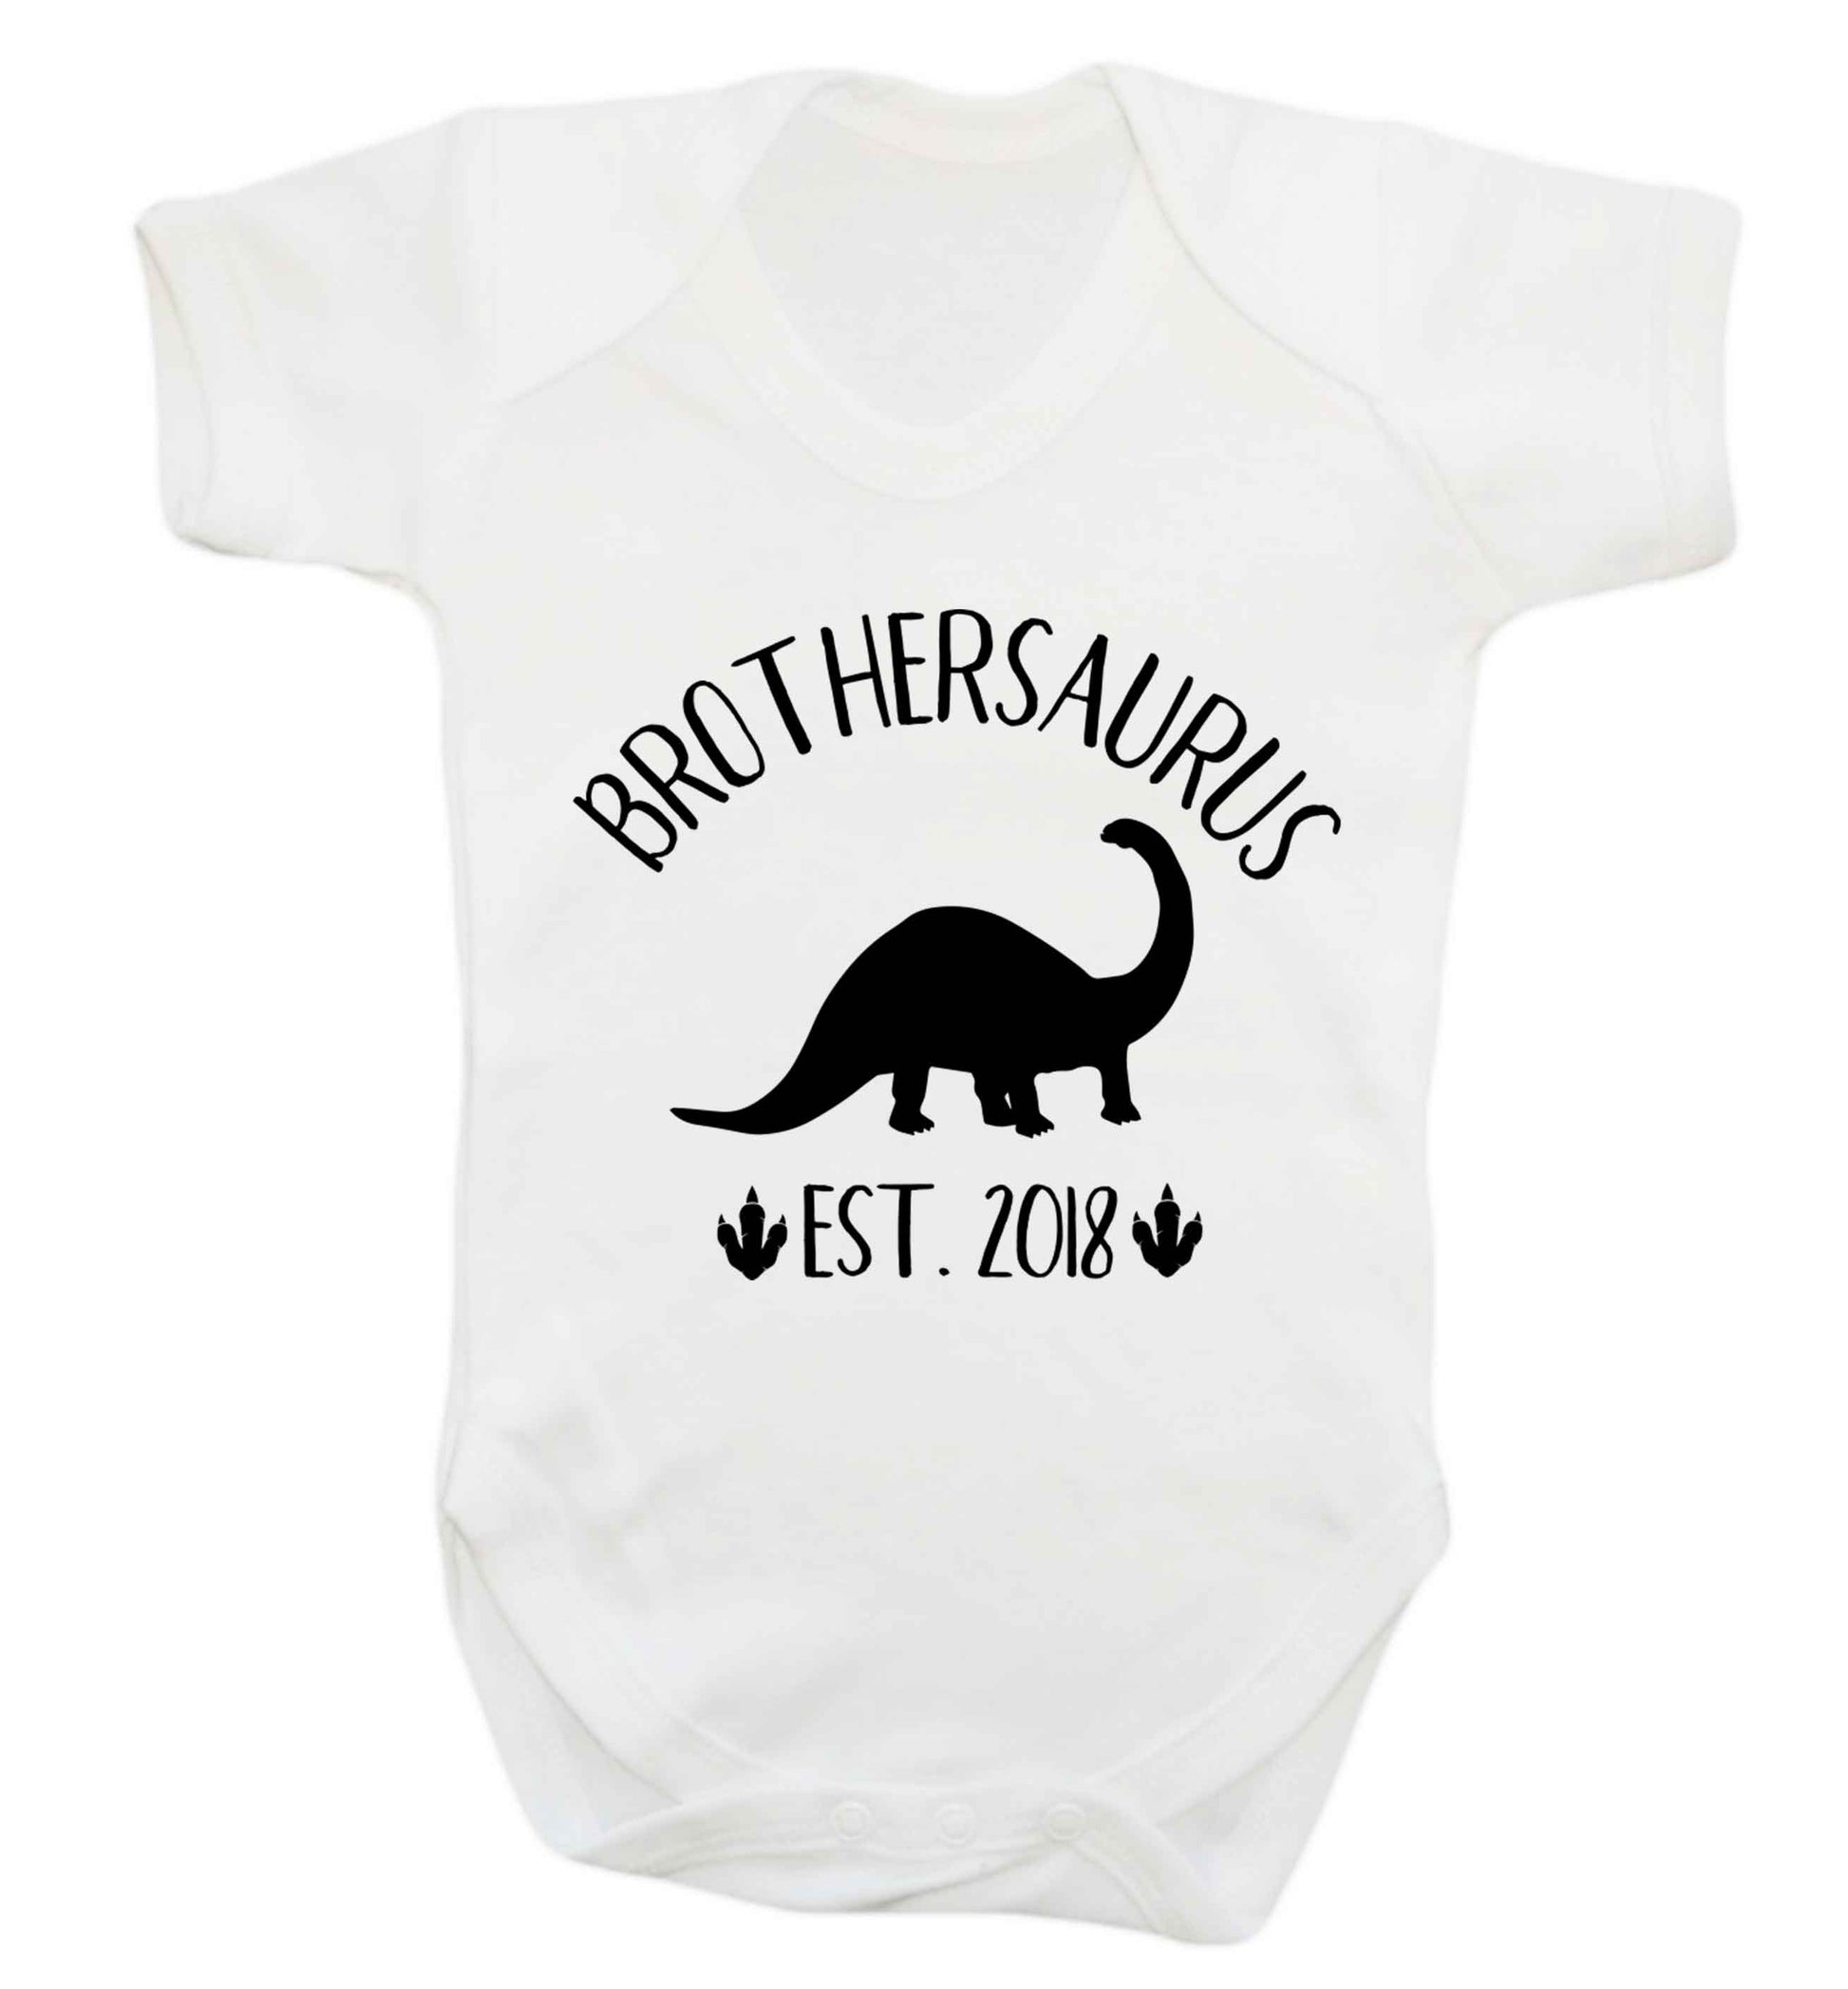 Personalised brothersaurus since (custom date) Baby Vest white 18-24 months